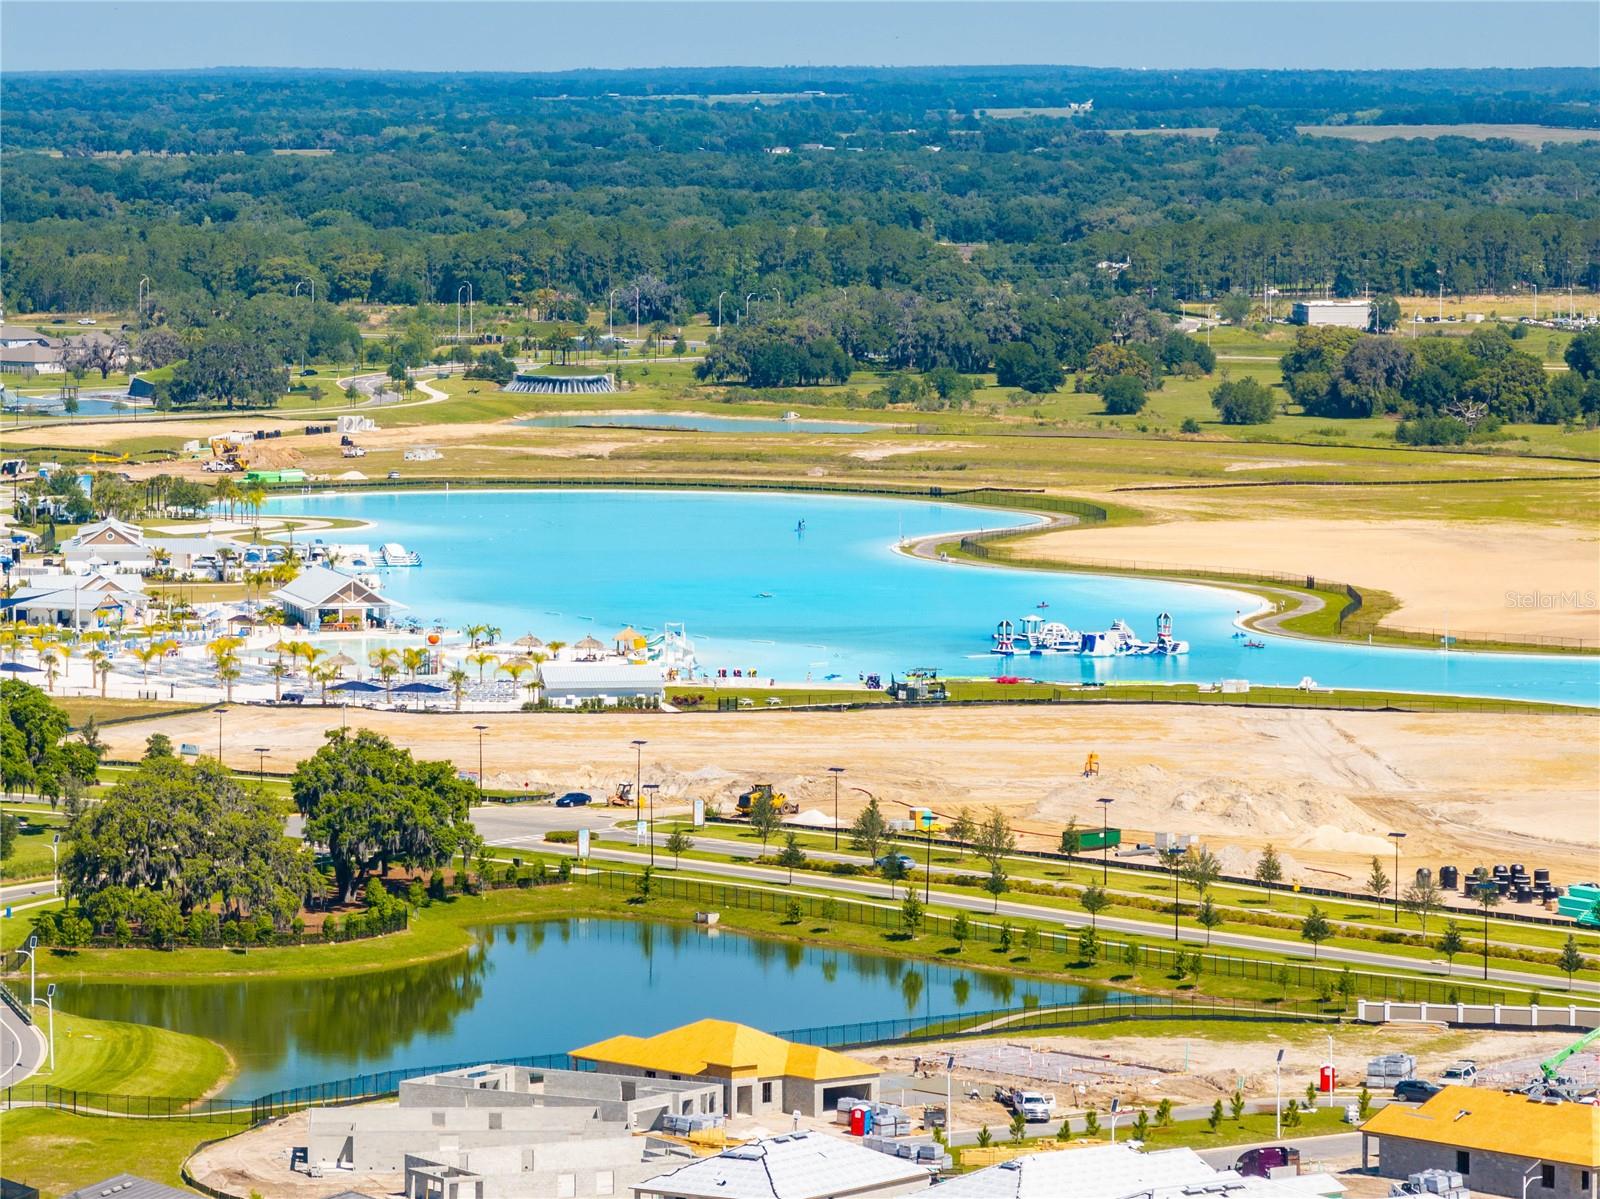 Aerial view of Lagoon